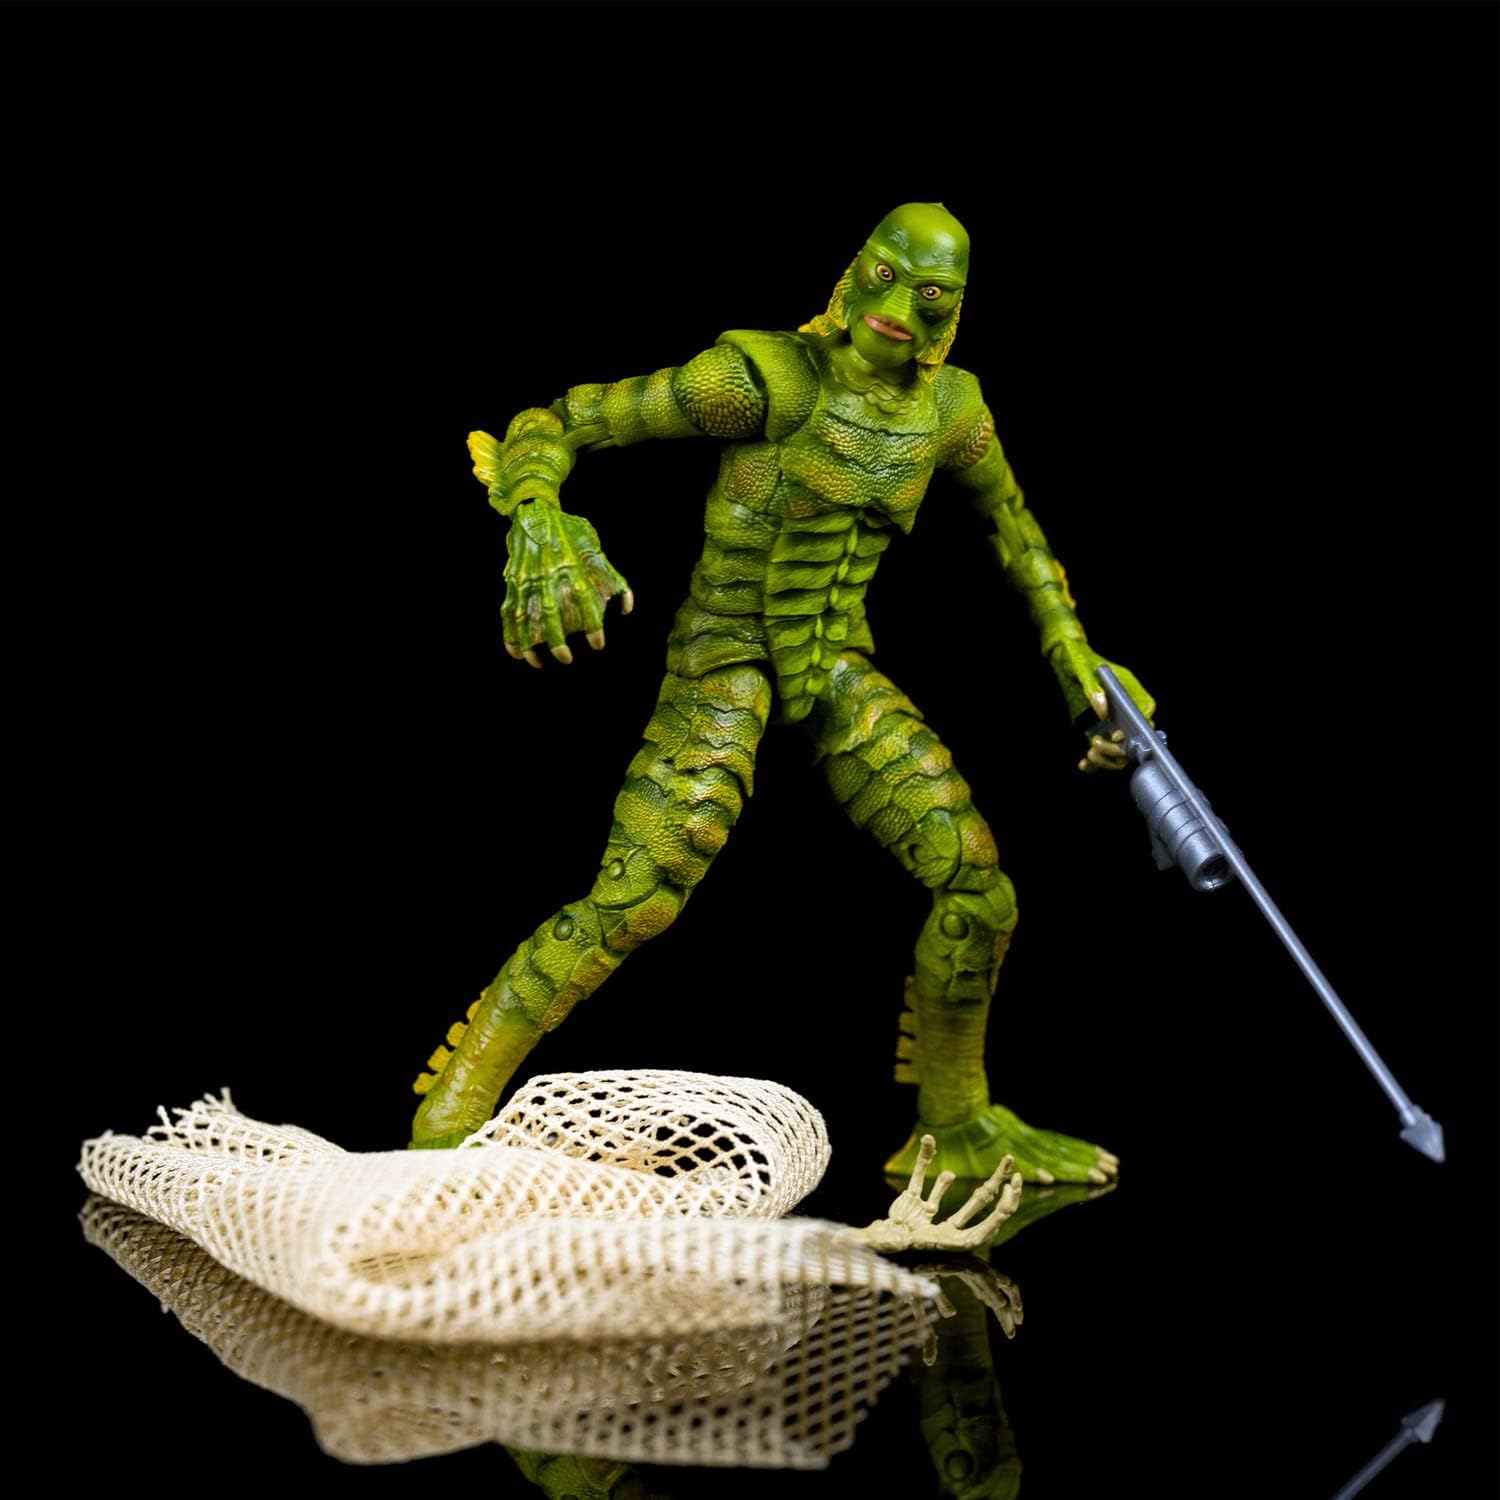 Universal Monsters: Creature from the Black Lagoon 6" Figure